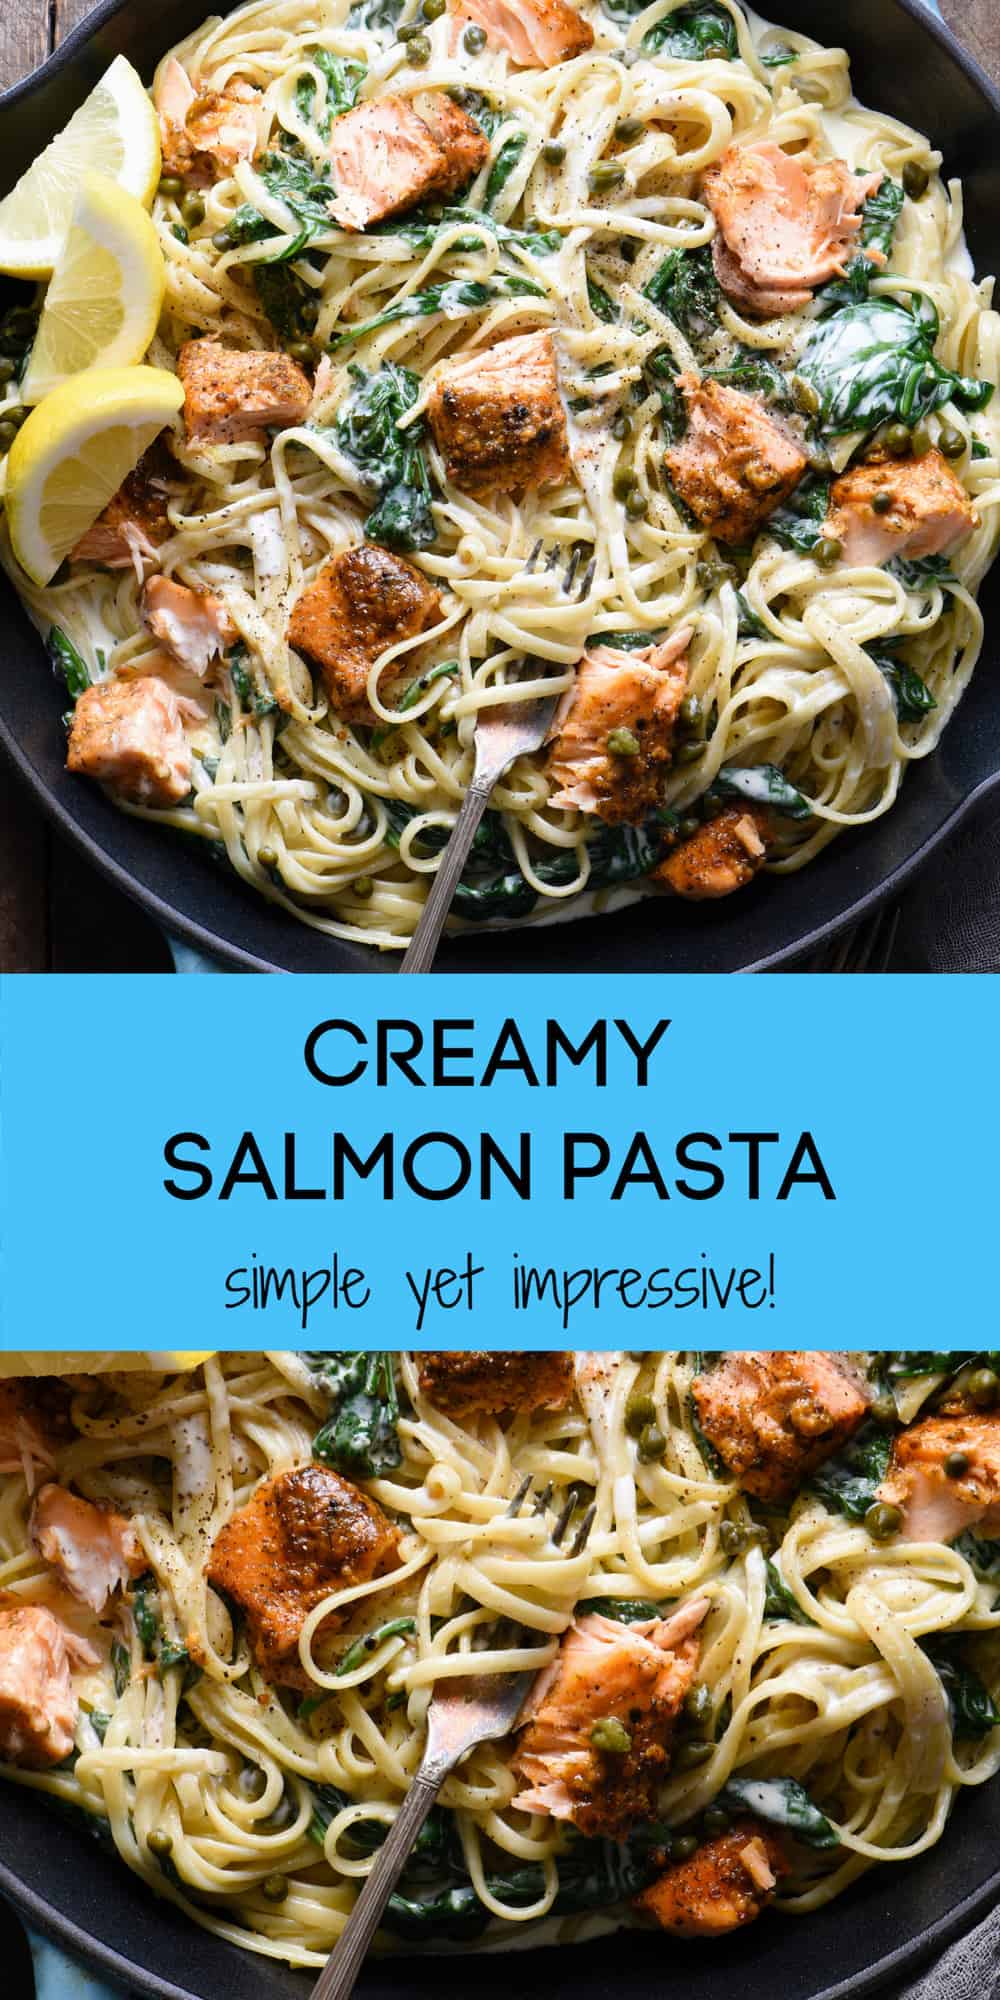 A collage of images with overlay "CREAMY SALMON PASTA simple yet impressive!"